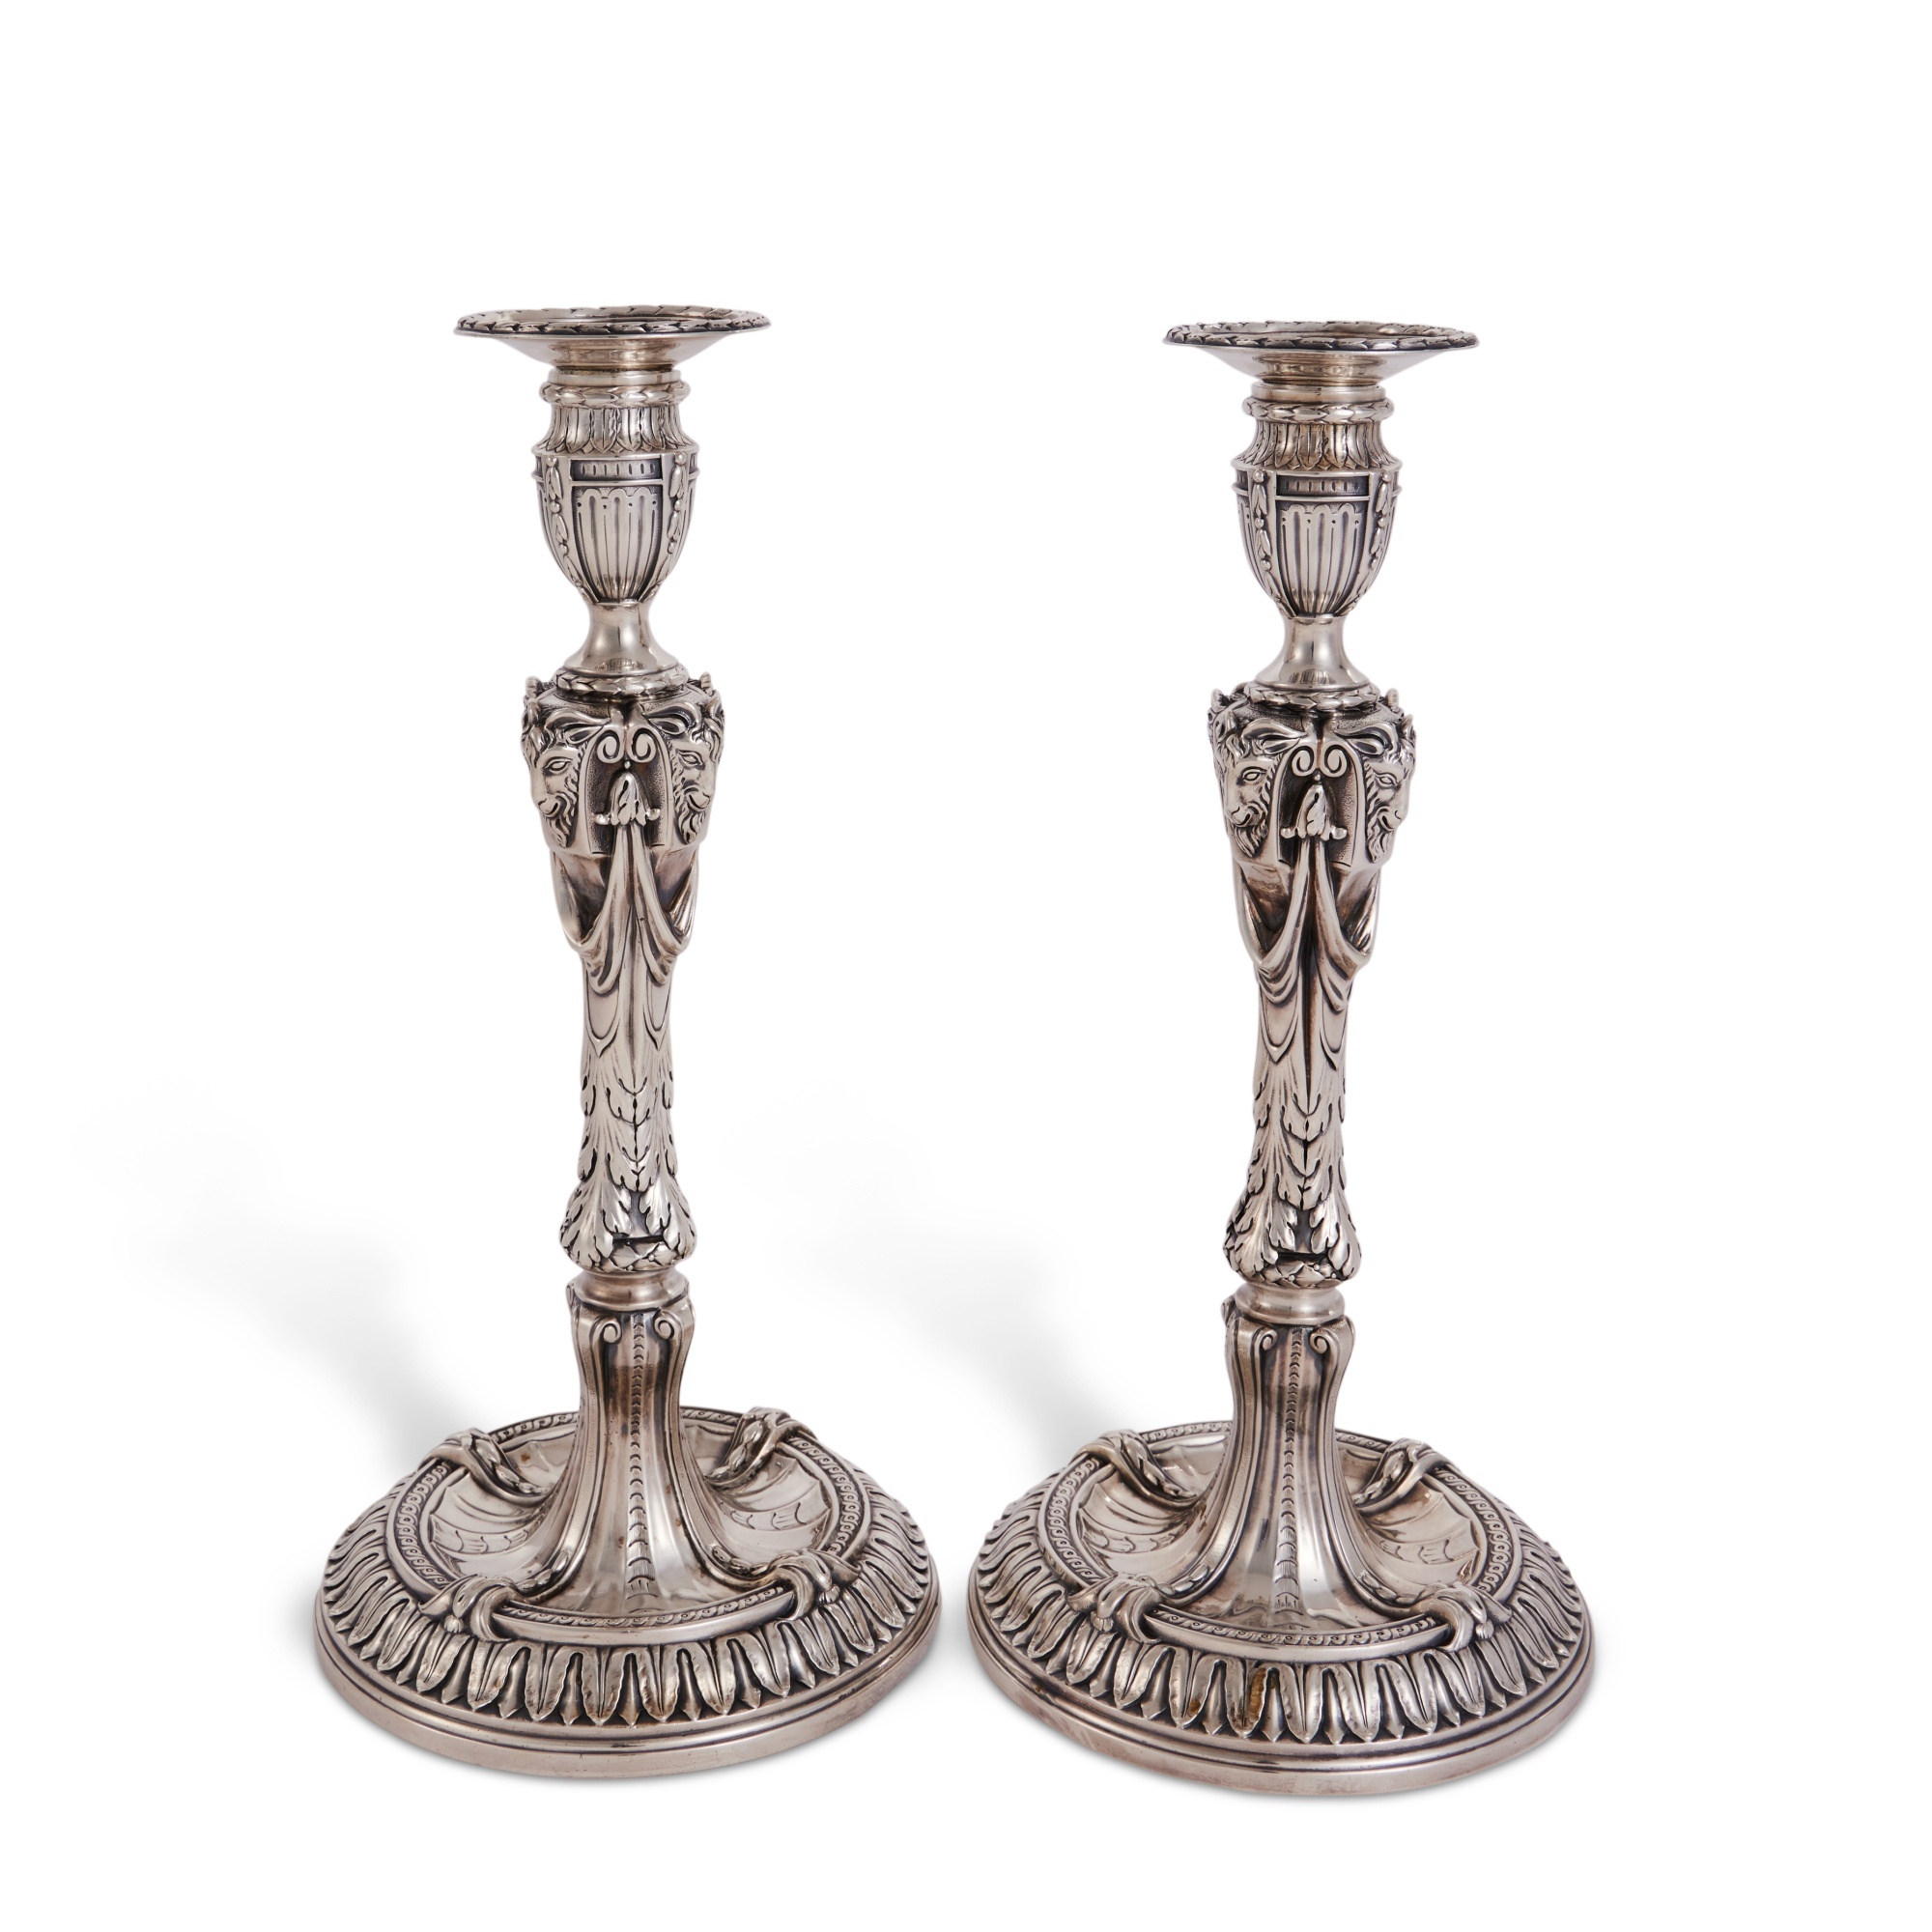 A Large Pair Of George III Silver Candlesticks, Frederick Kandler, London, 1777 - Image 3 of 6